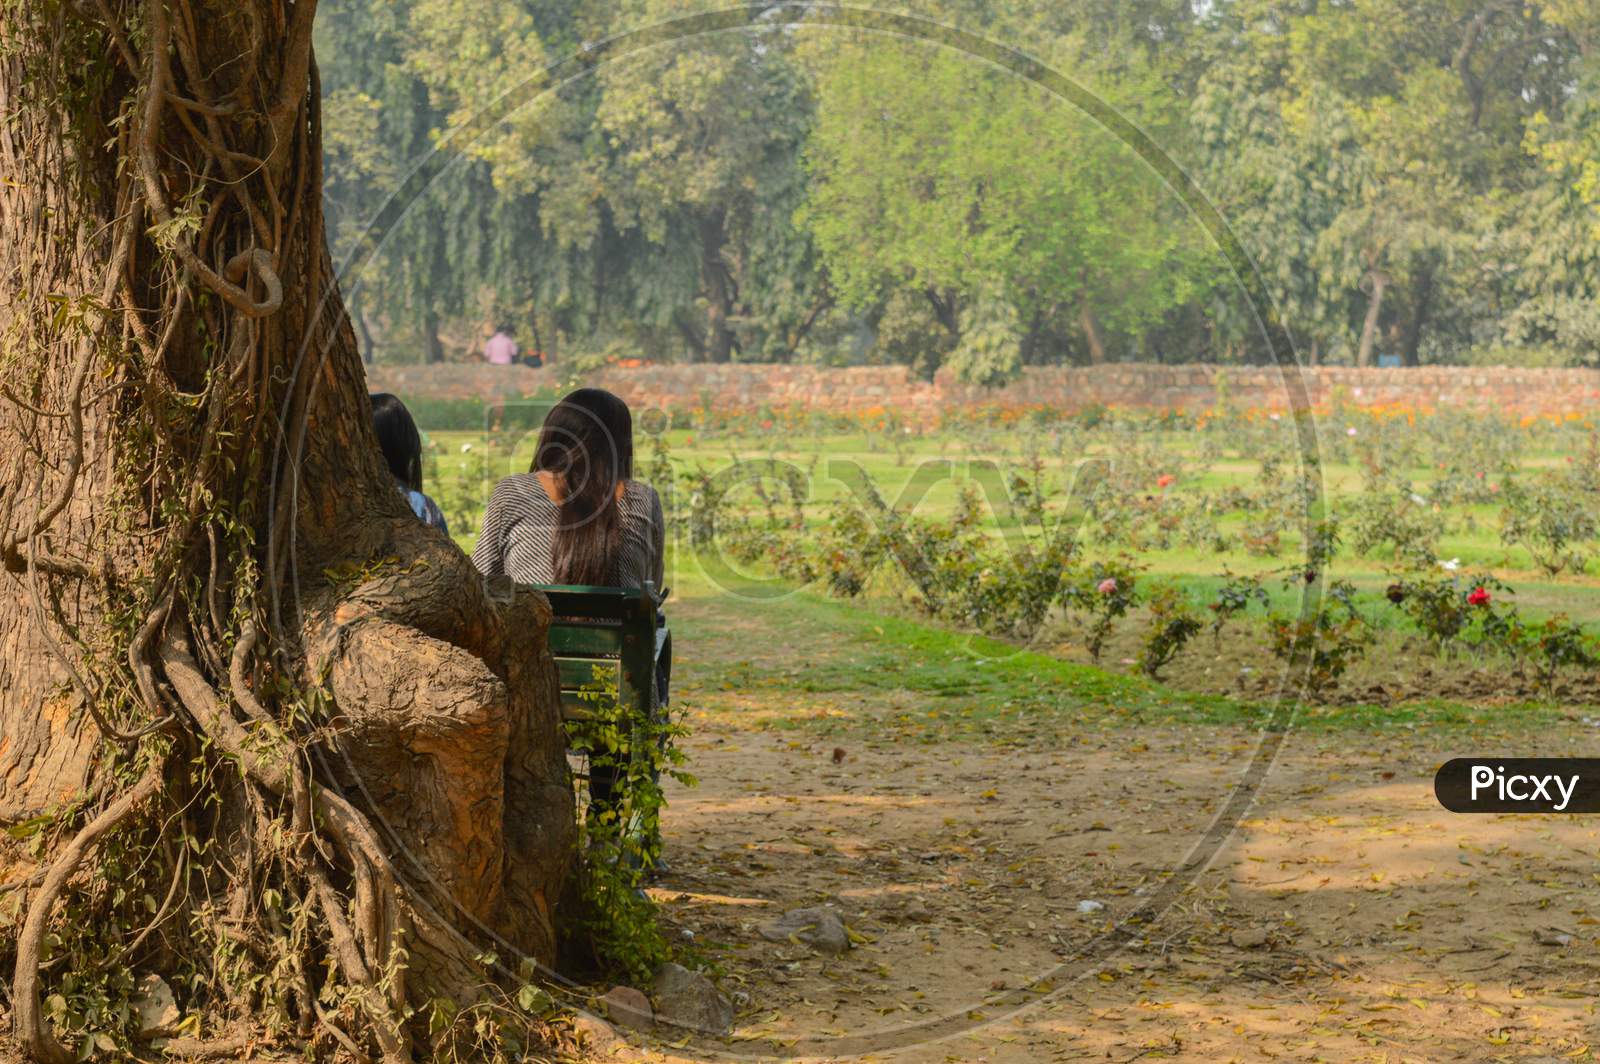 A Girl Sit Beside Of The Big Indian Banyan Tree On The Bench At Gardens In A City Park From The Side Of The Lawn At Winter Foggy Morning.